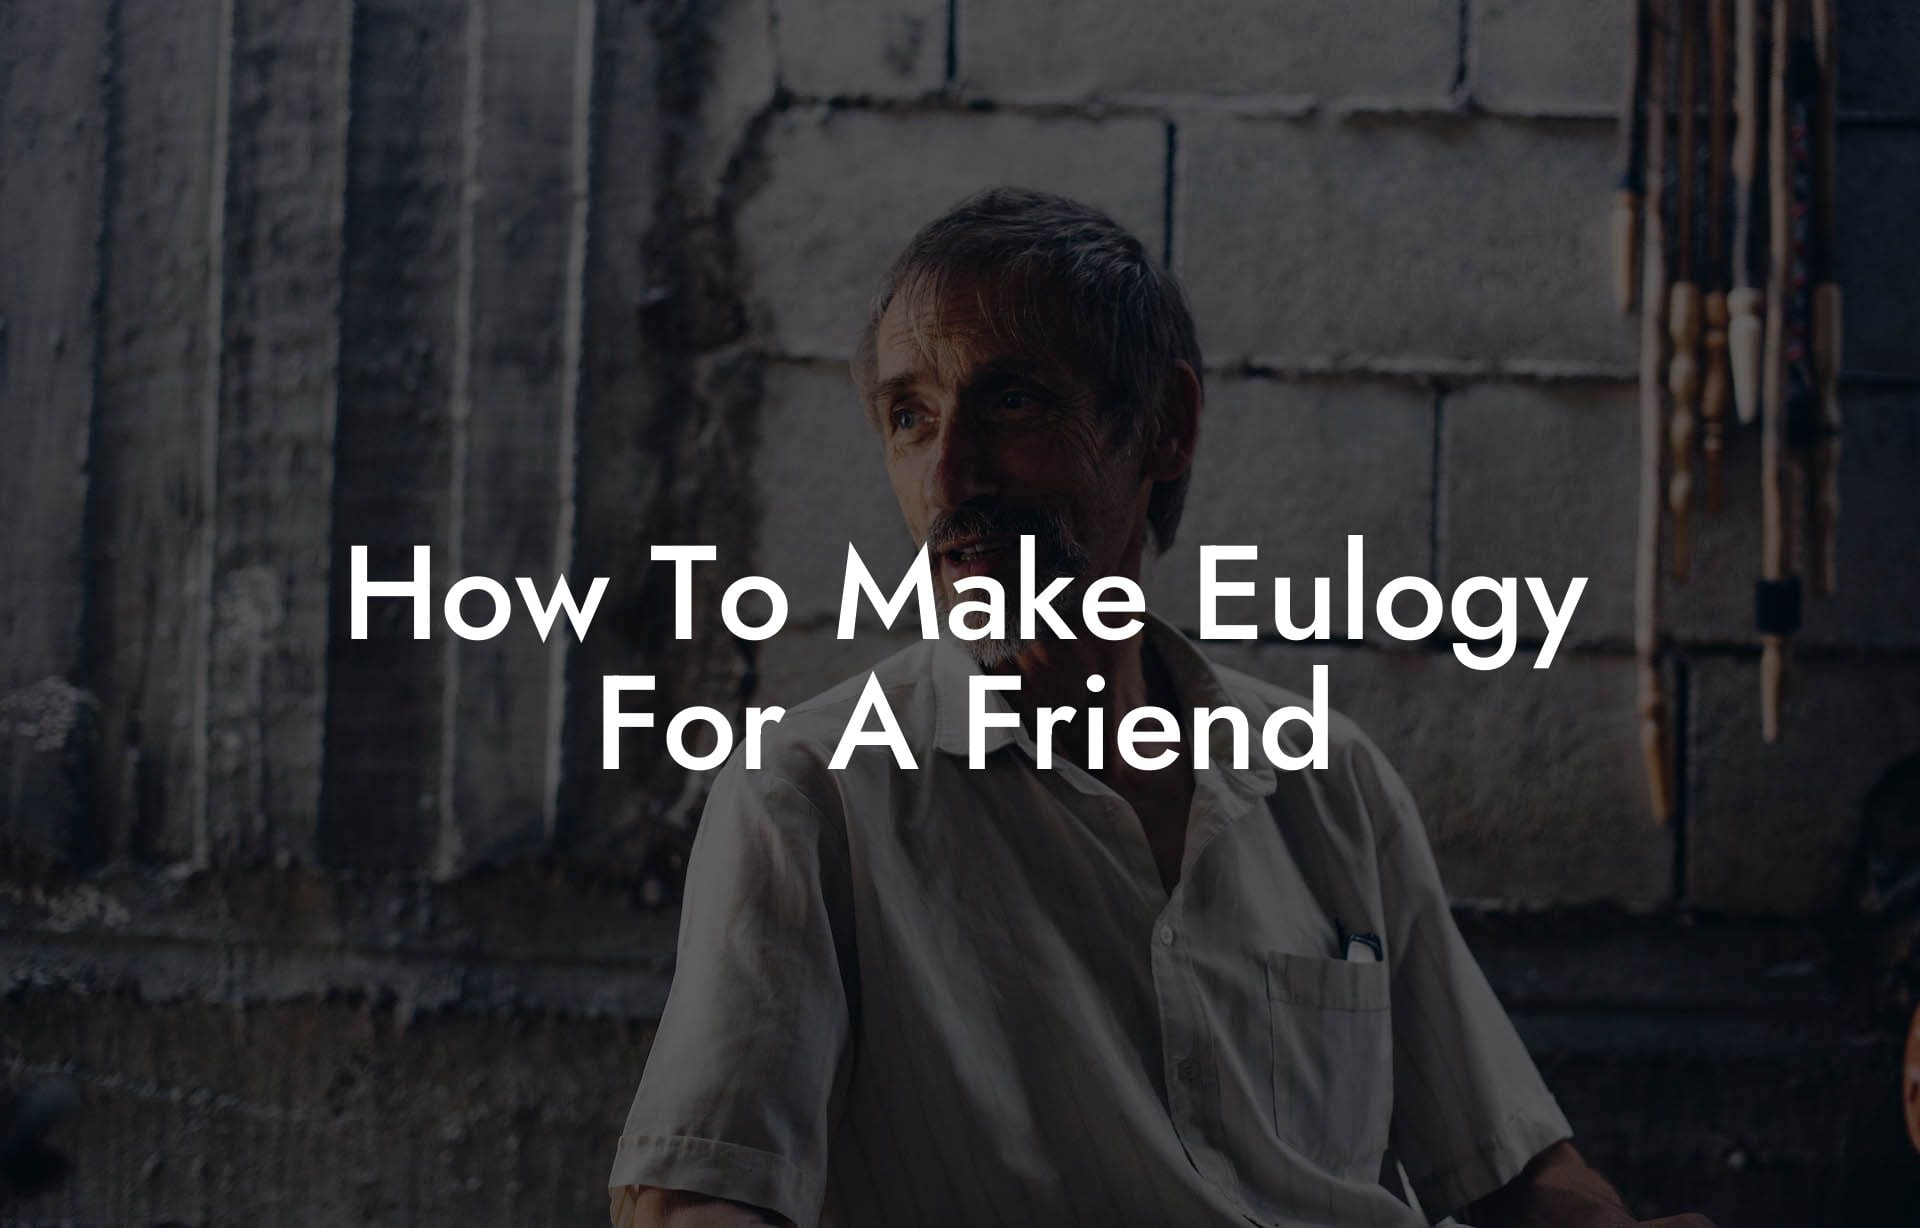 How To Make Eulogy For A Friend